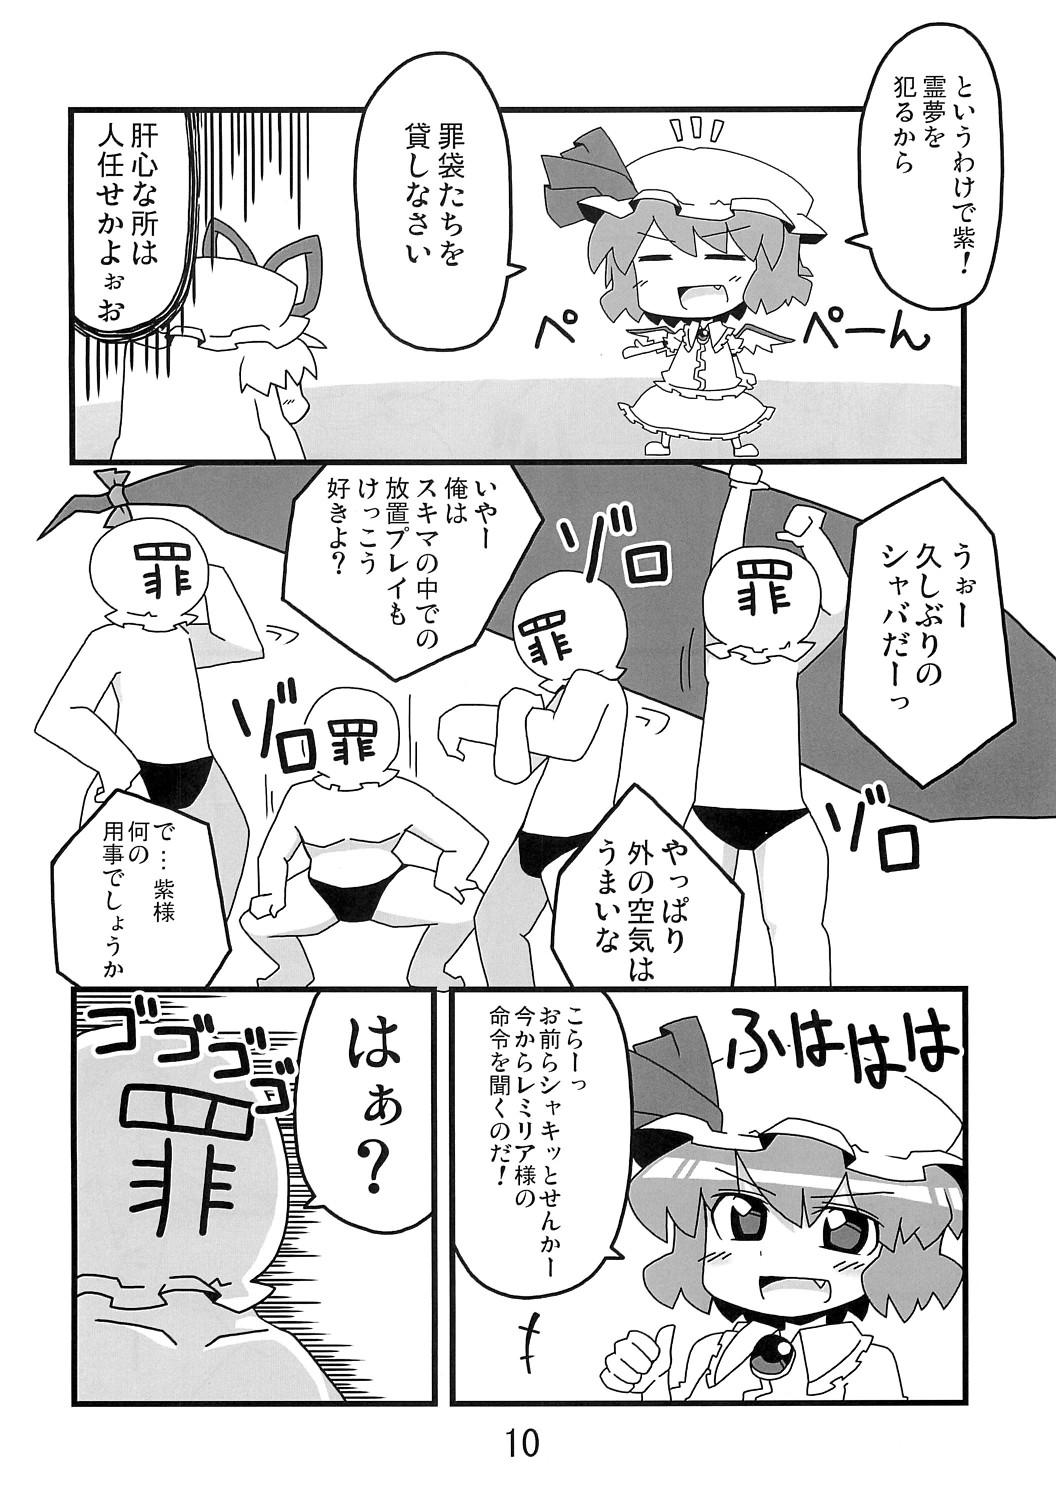 Game 東方豊年祭 - Touhou project Naija - Page 9